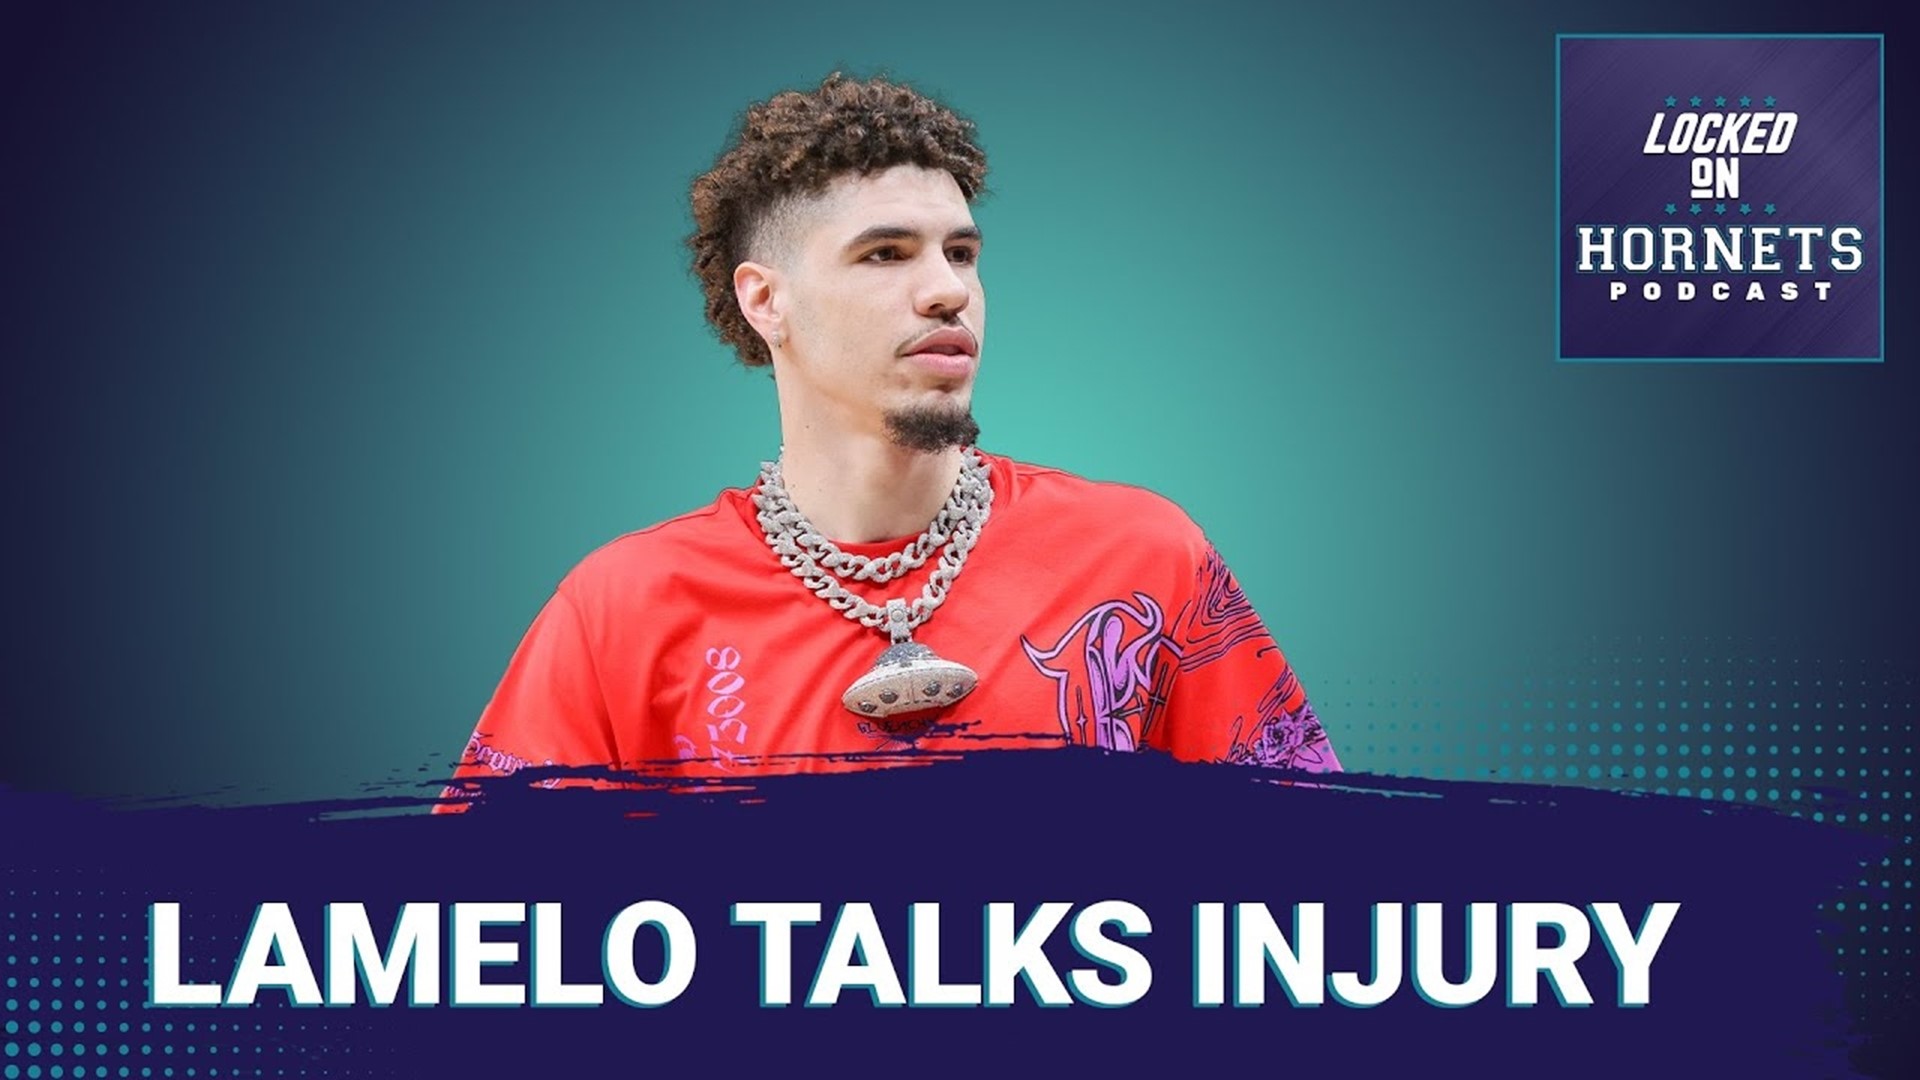 LaMelo speaks! & the Charlotte Hornets still have some FIGHT left in them vs. Indiana Pacers